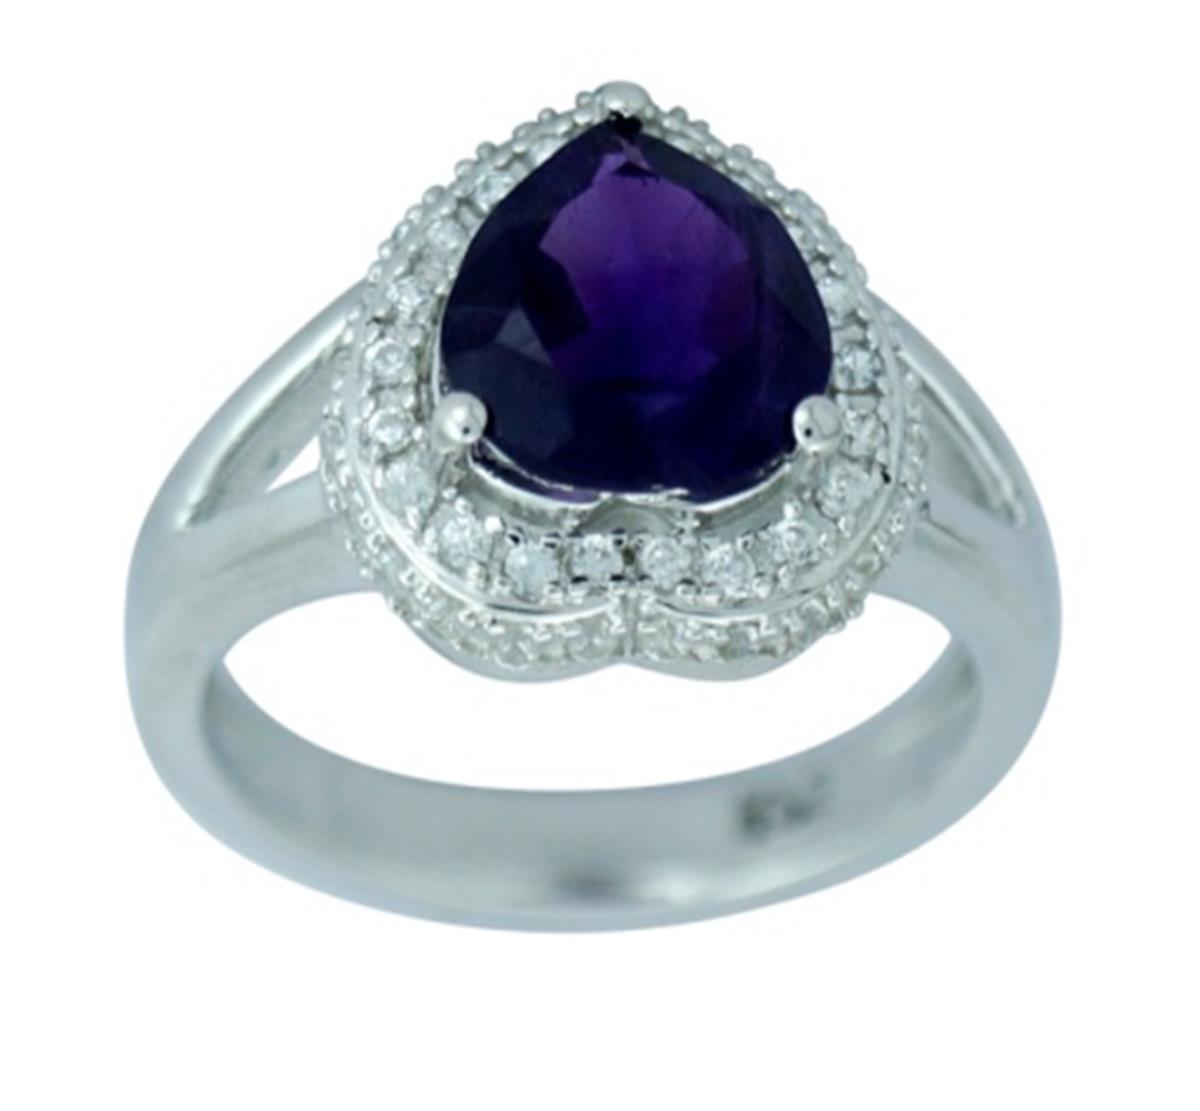 10K White Gold 9mm Heart Cut Amethyst with White Zircon Halo Fashion Ring